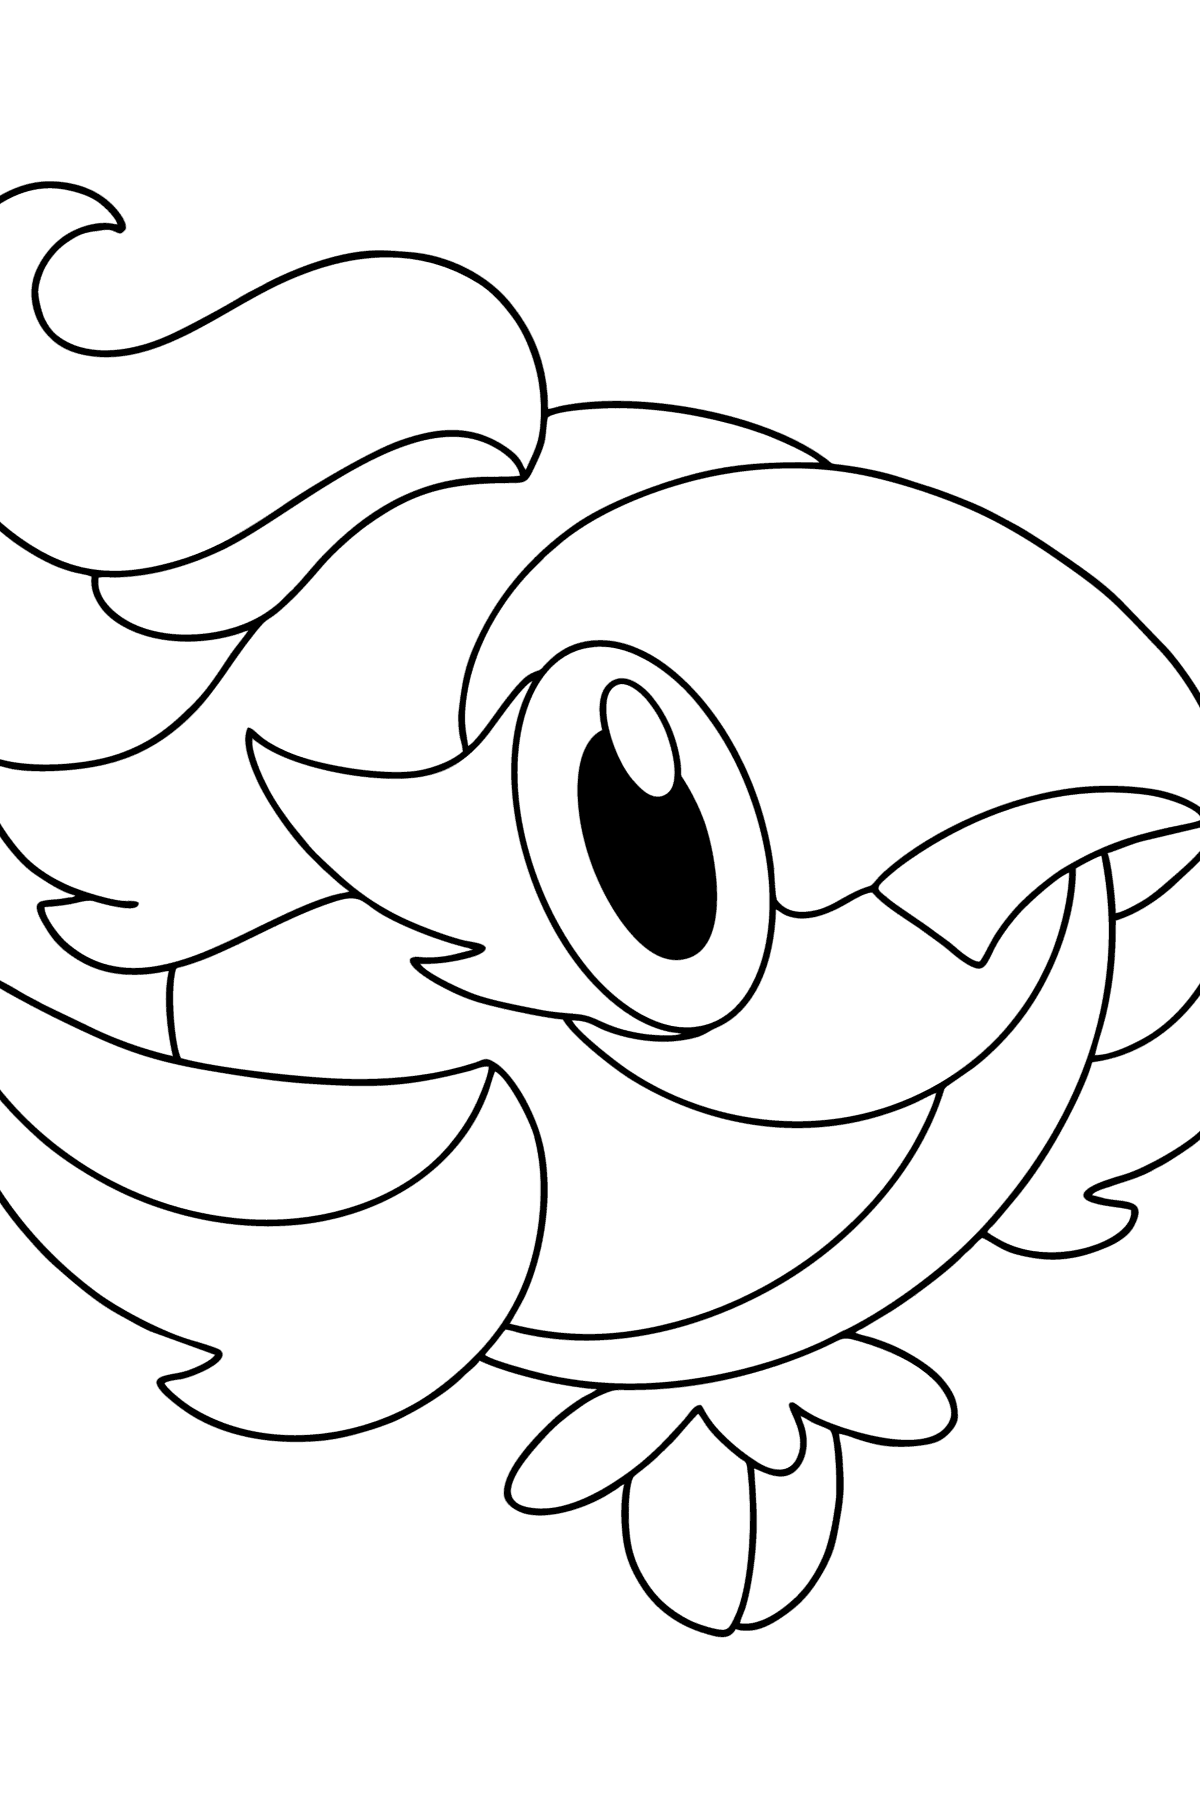 Colouring page Pokémon X and Y Spritzee - Coloring Pages for Kids